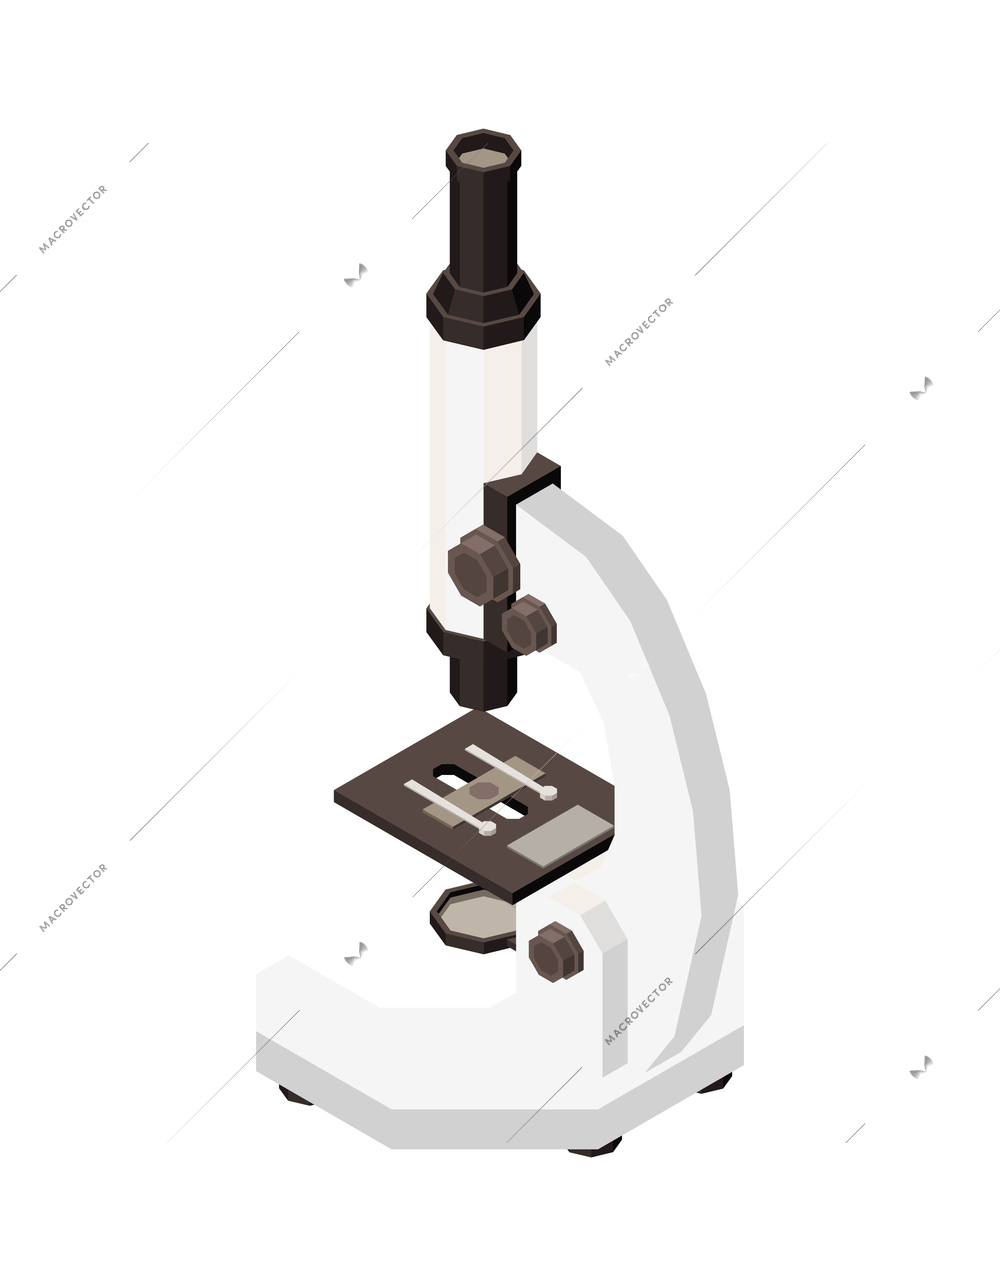 Vaccination isometric composition with isolated image of laboratory microscope on blank background vector illustration